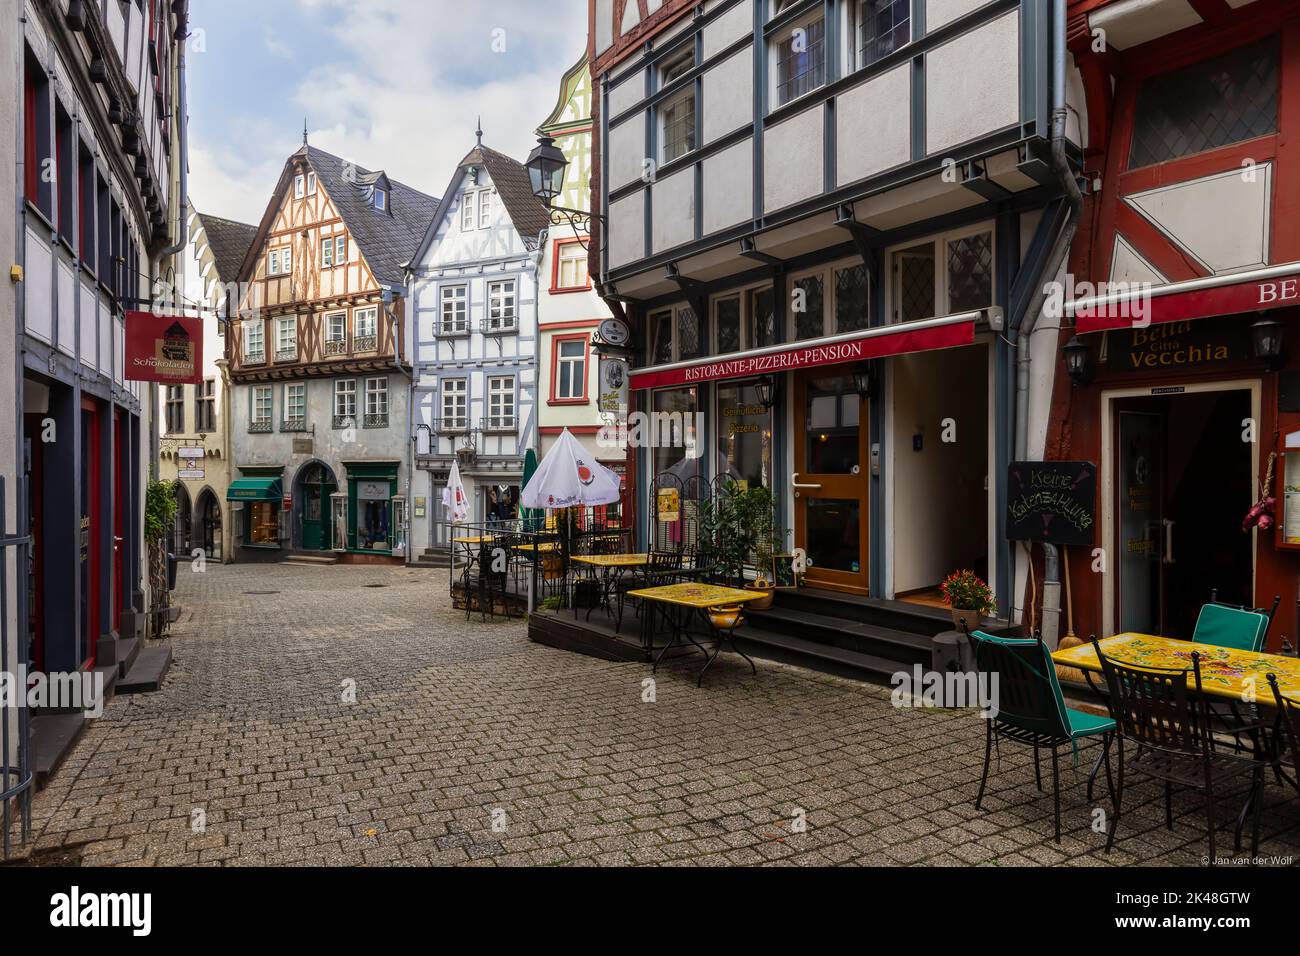 Half-timbered houses in the center of Limburg an der lahn in Germany. Stock Photo